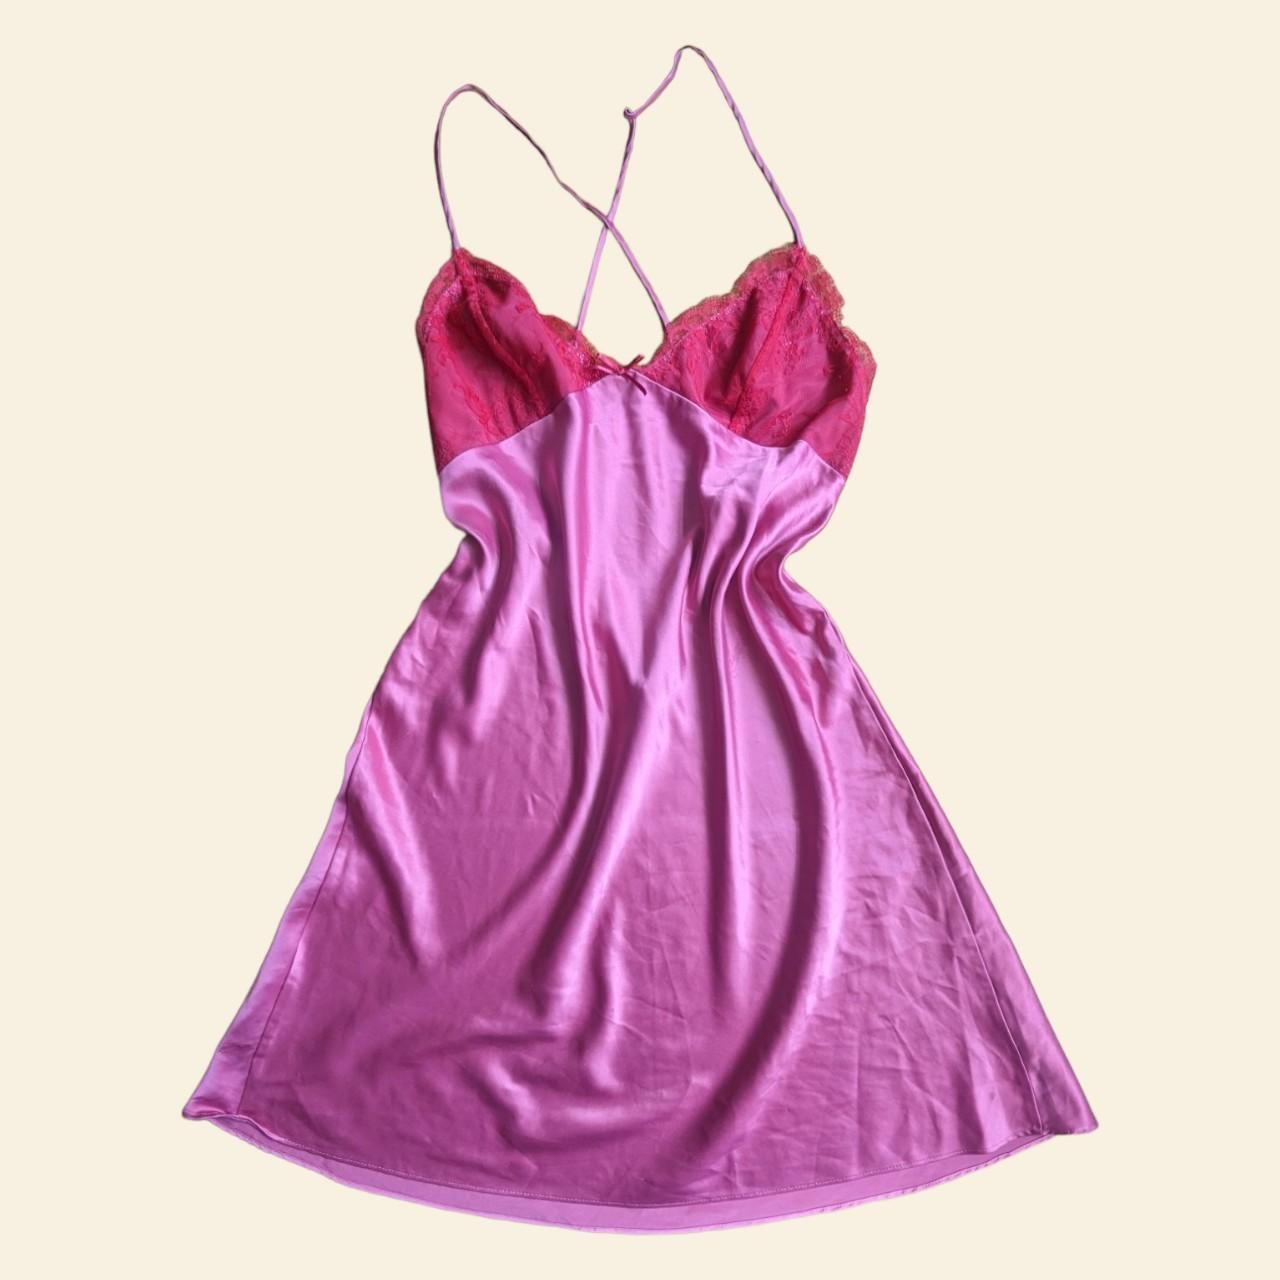 Y2k pink slip mini dress with deep red lace cups and... - Depop